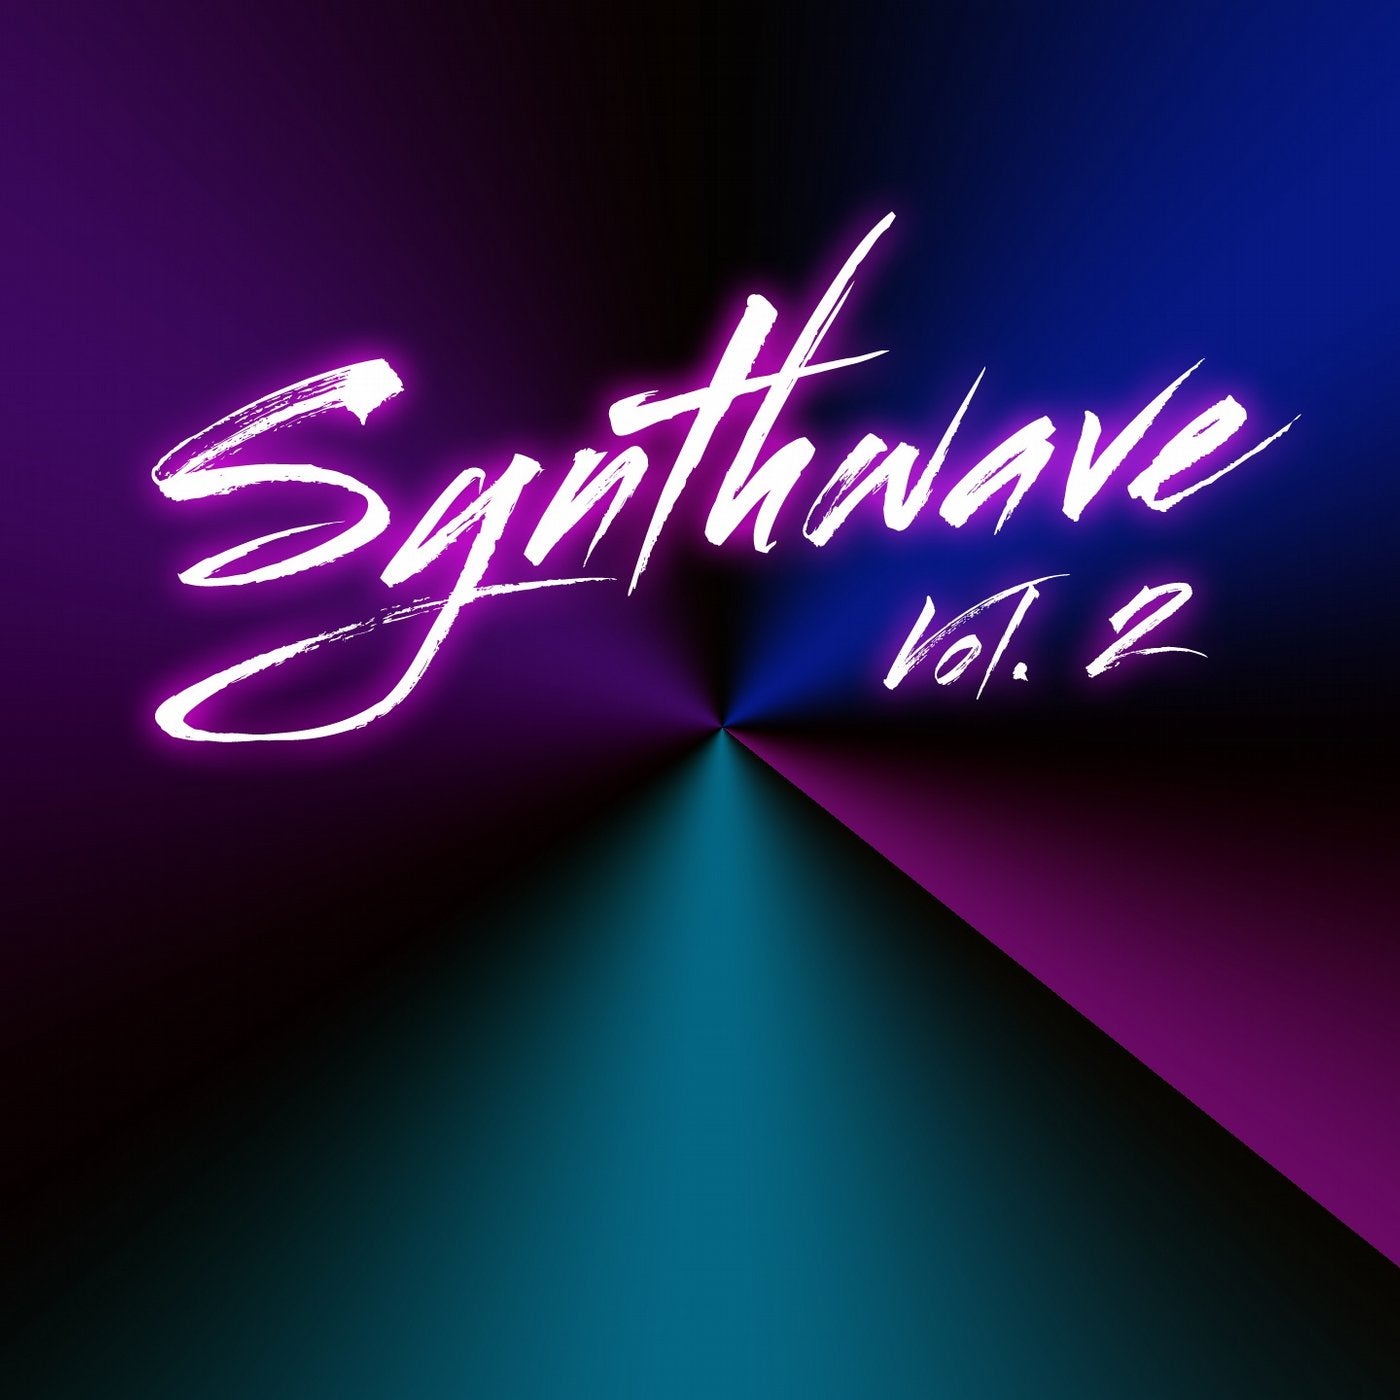 Synthwave, Vol. 2